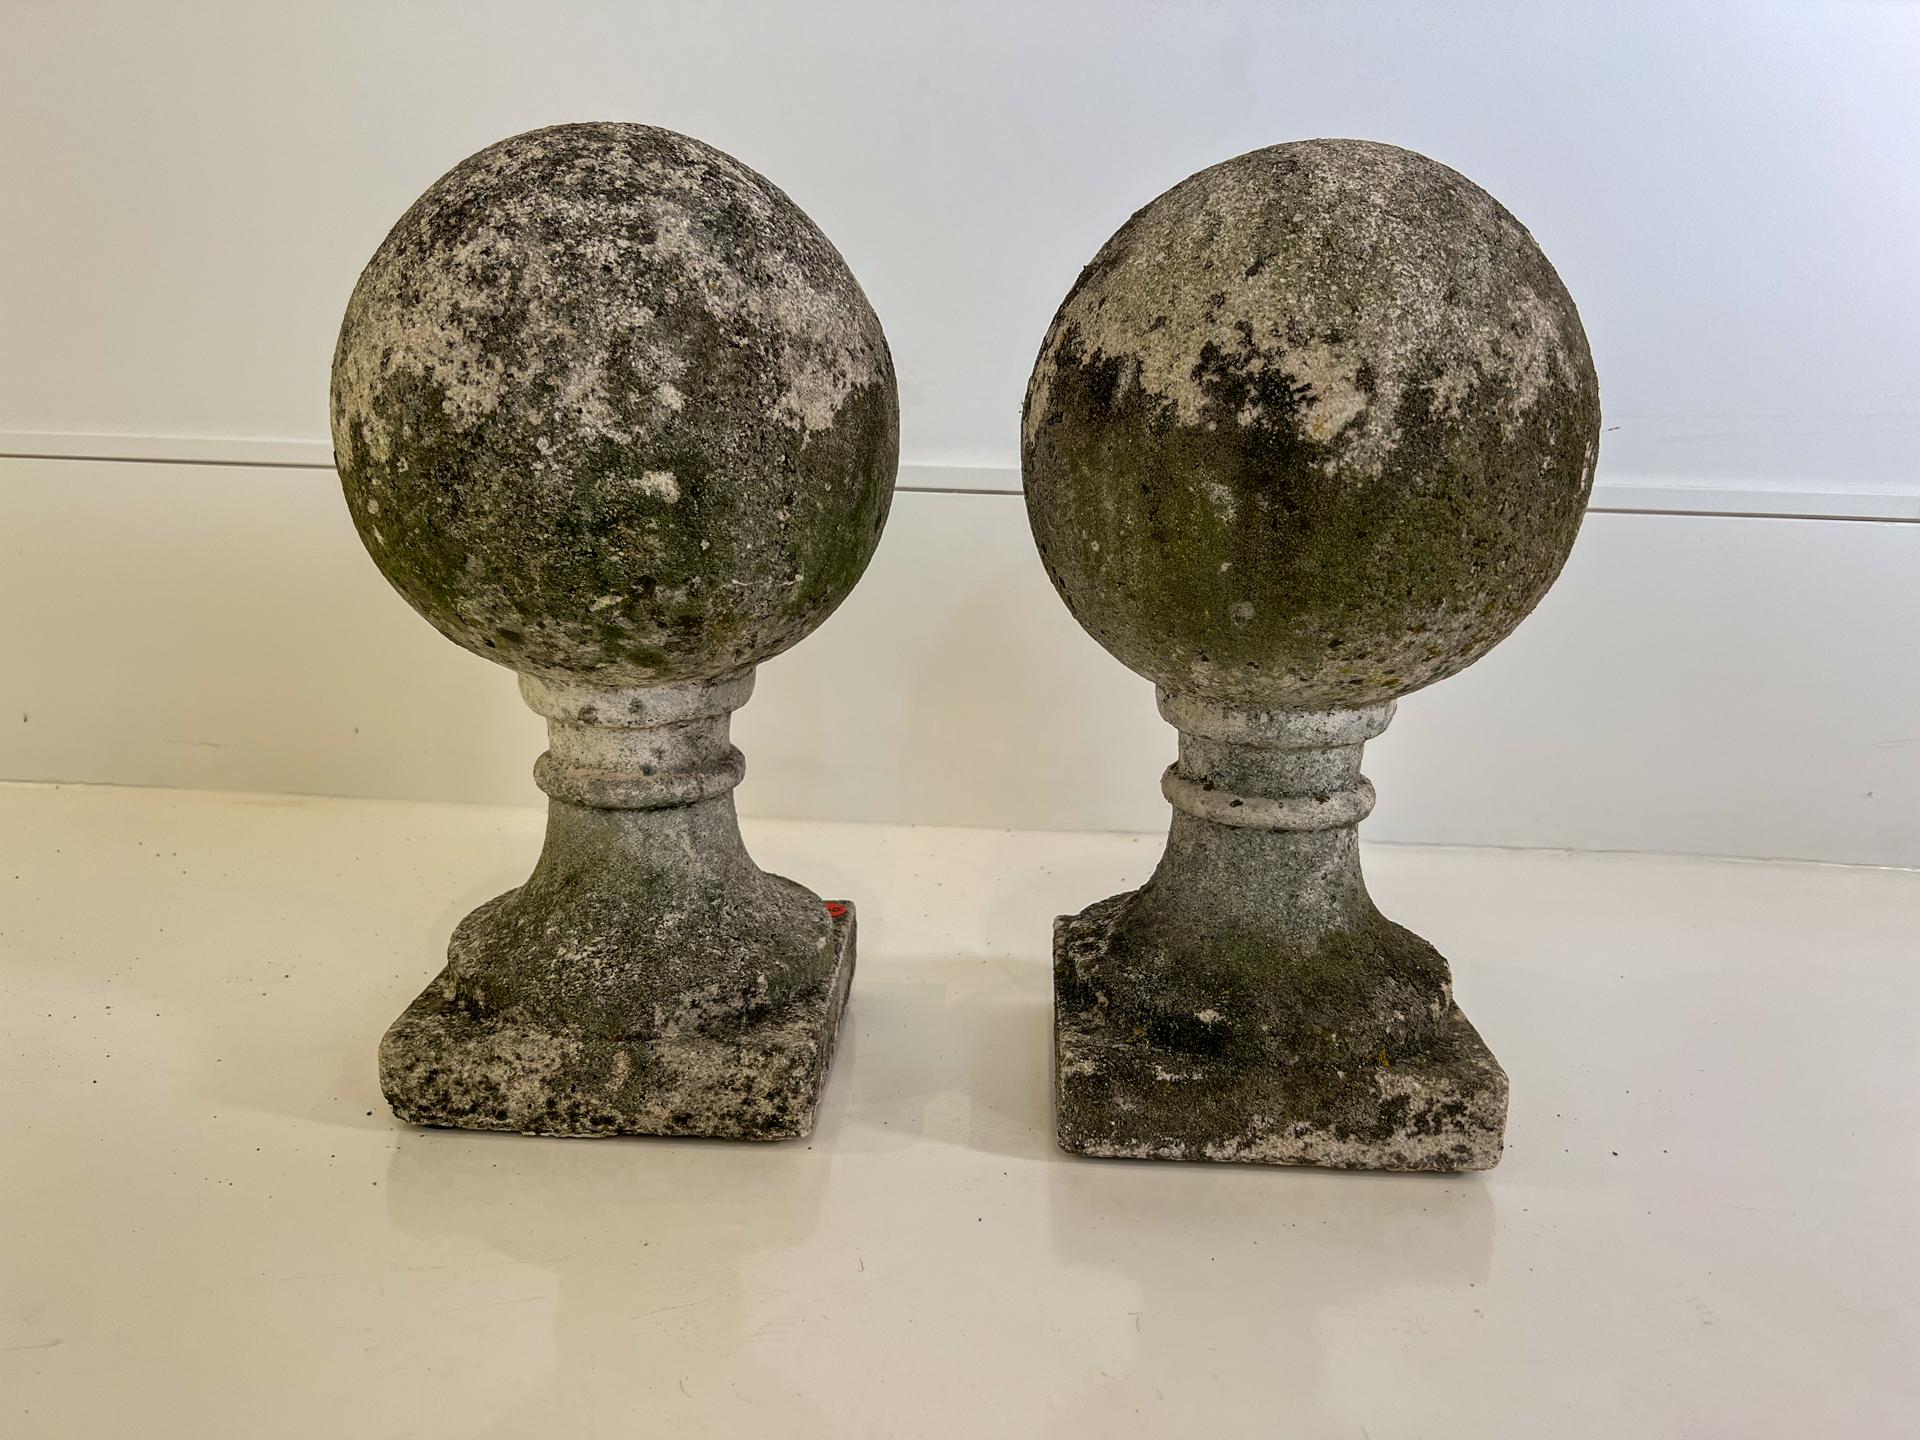 Always a classic: A pair of matching orbs on pedestals. These are concrete with a weathered and mossy patina.